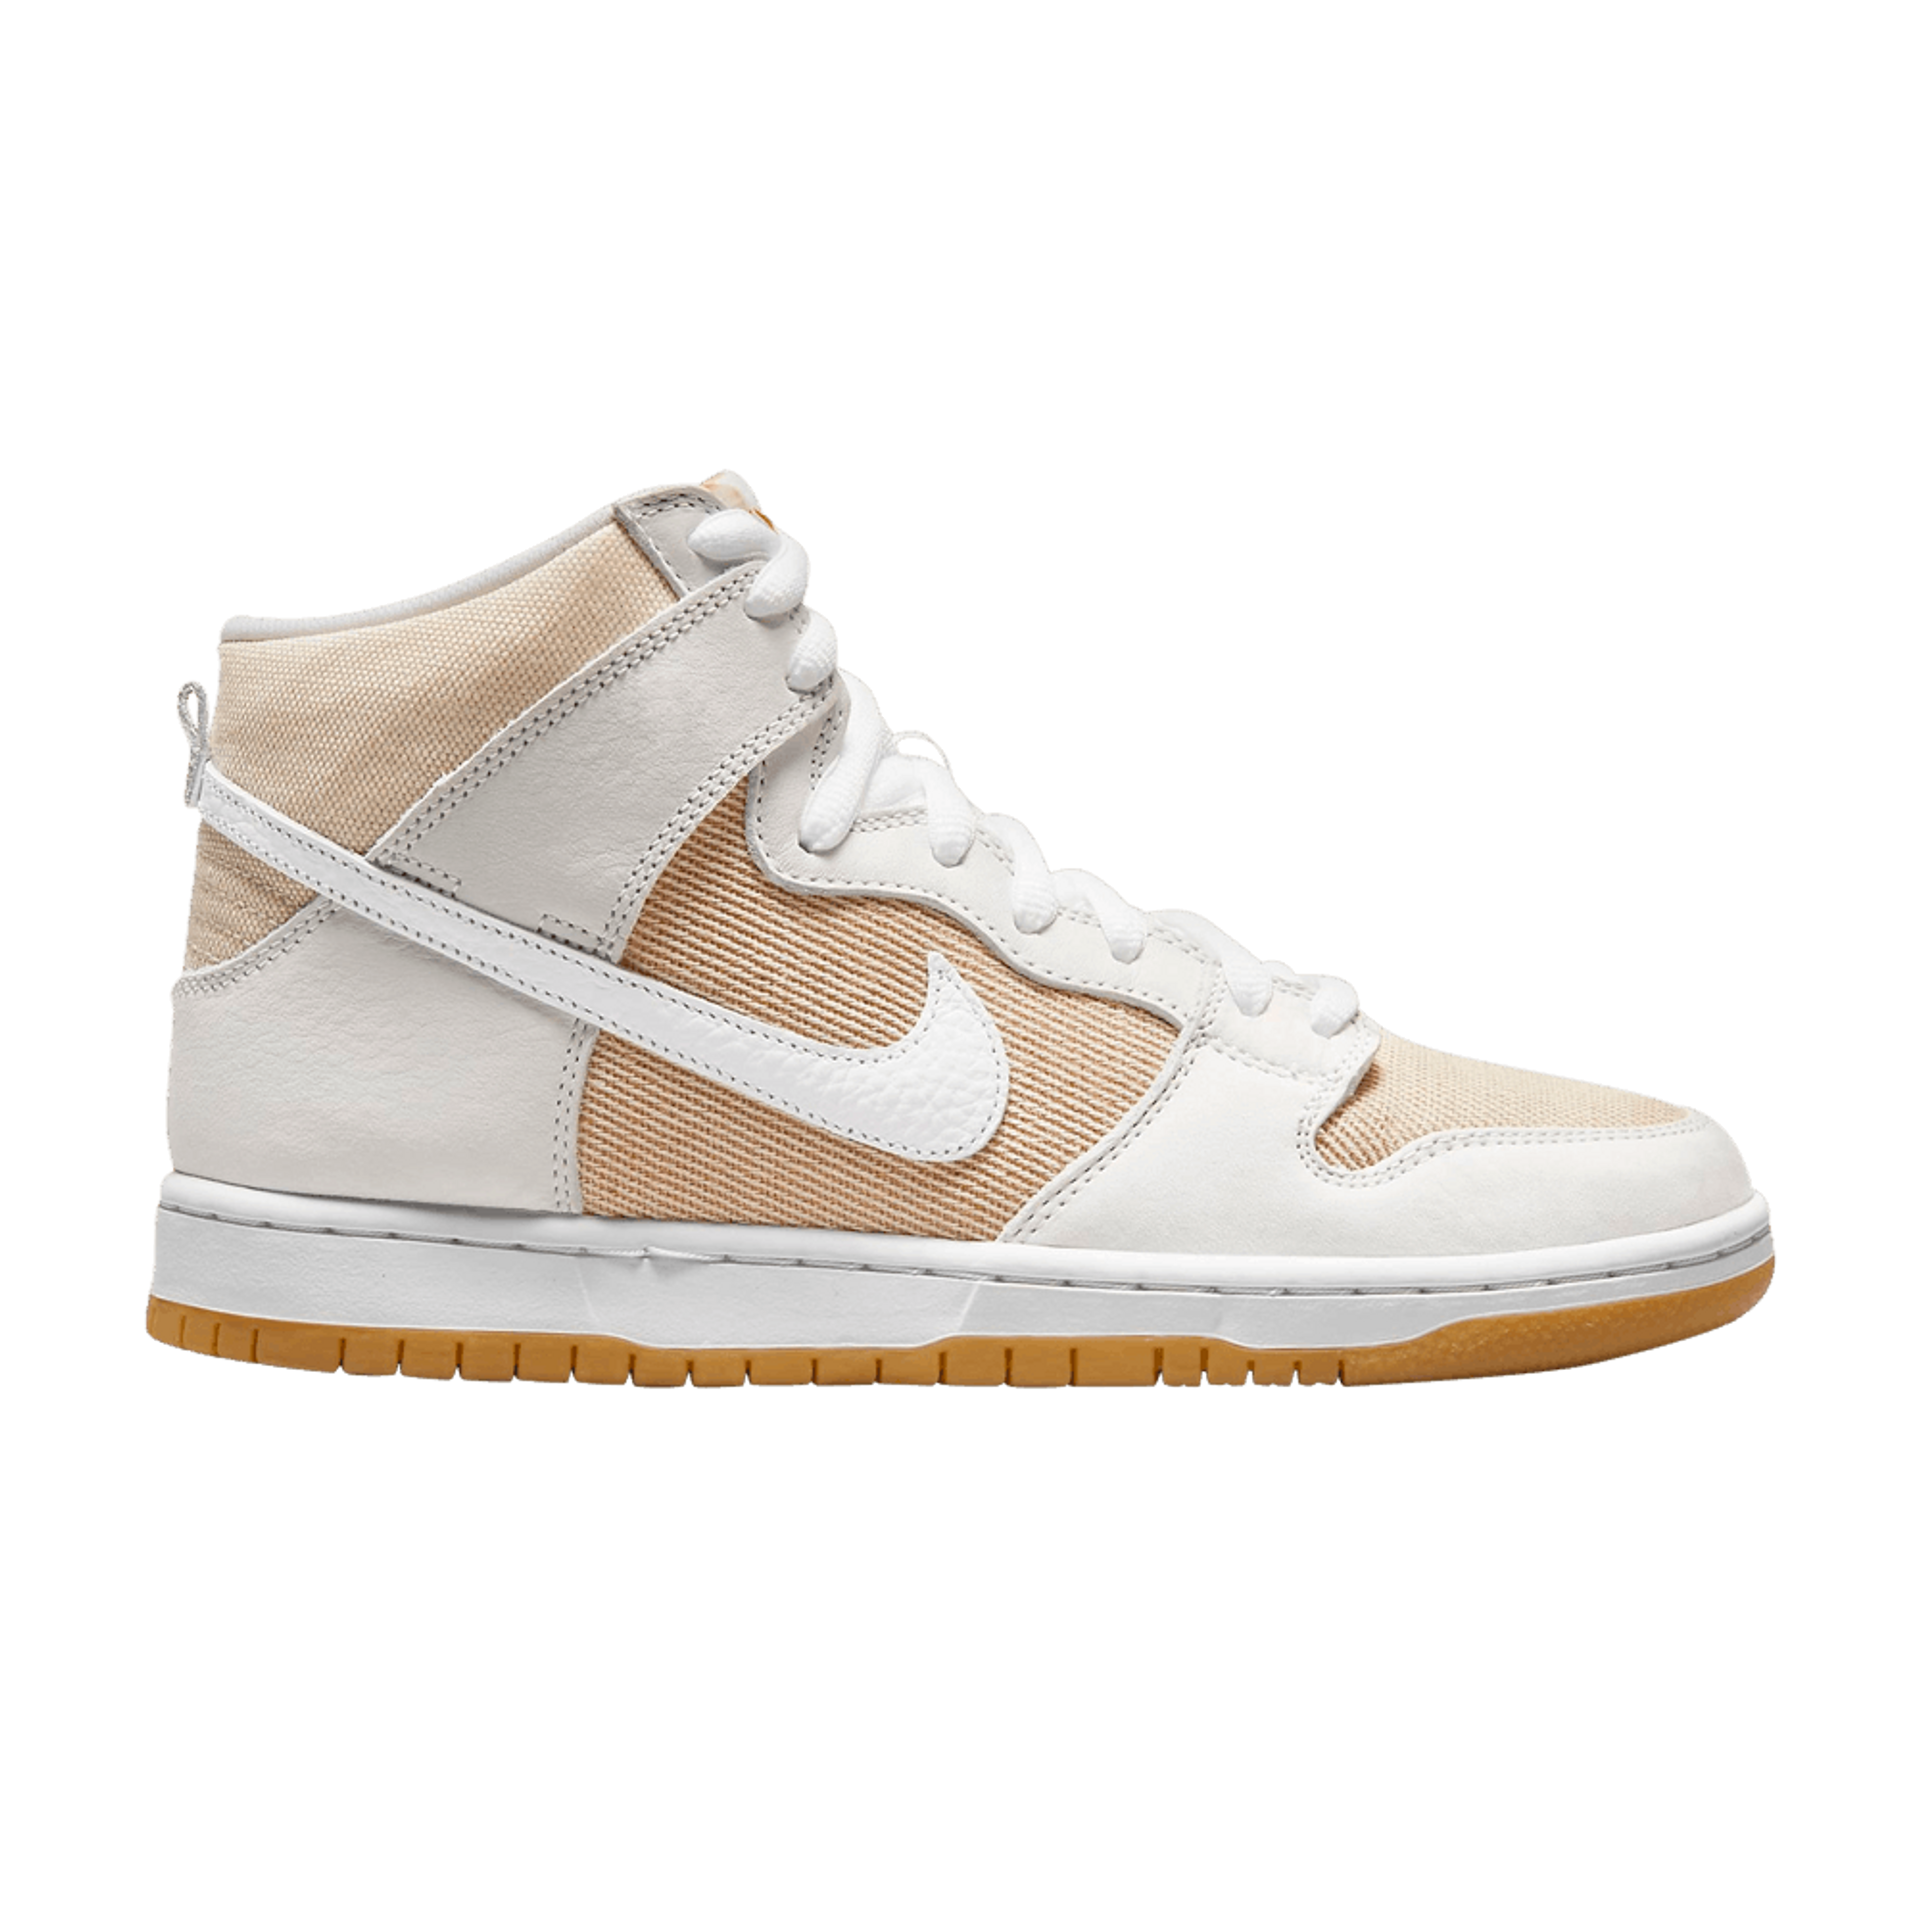 Nike Dunk High Pro ISO SB 'Unbleached Pack - Natural'